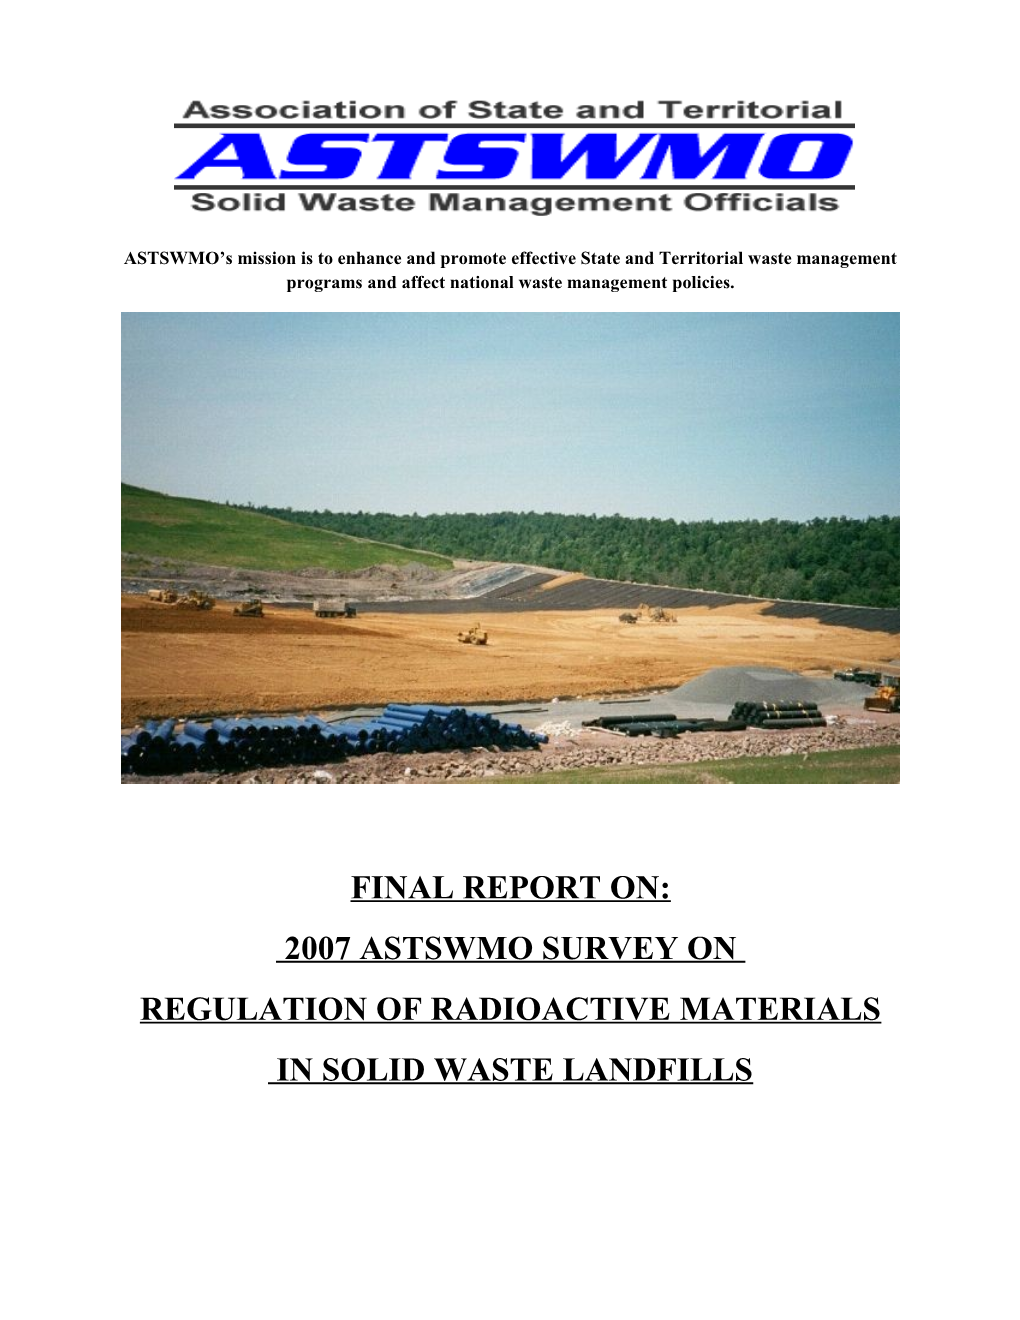 ASTSWMO S Mission Is to Enhance and Promote Effective State and Territorial Waste Management